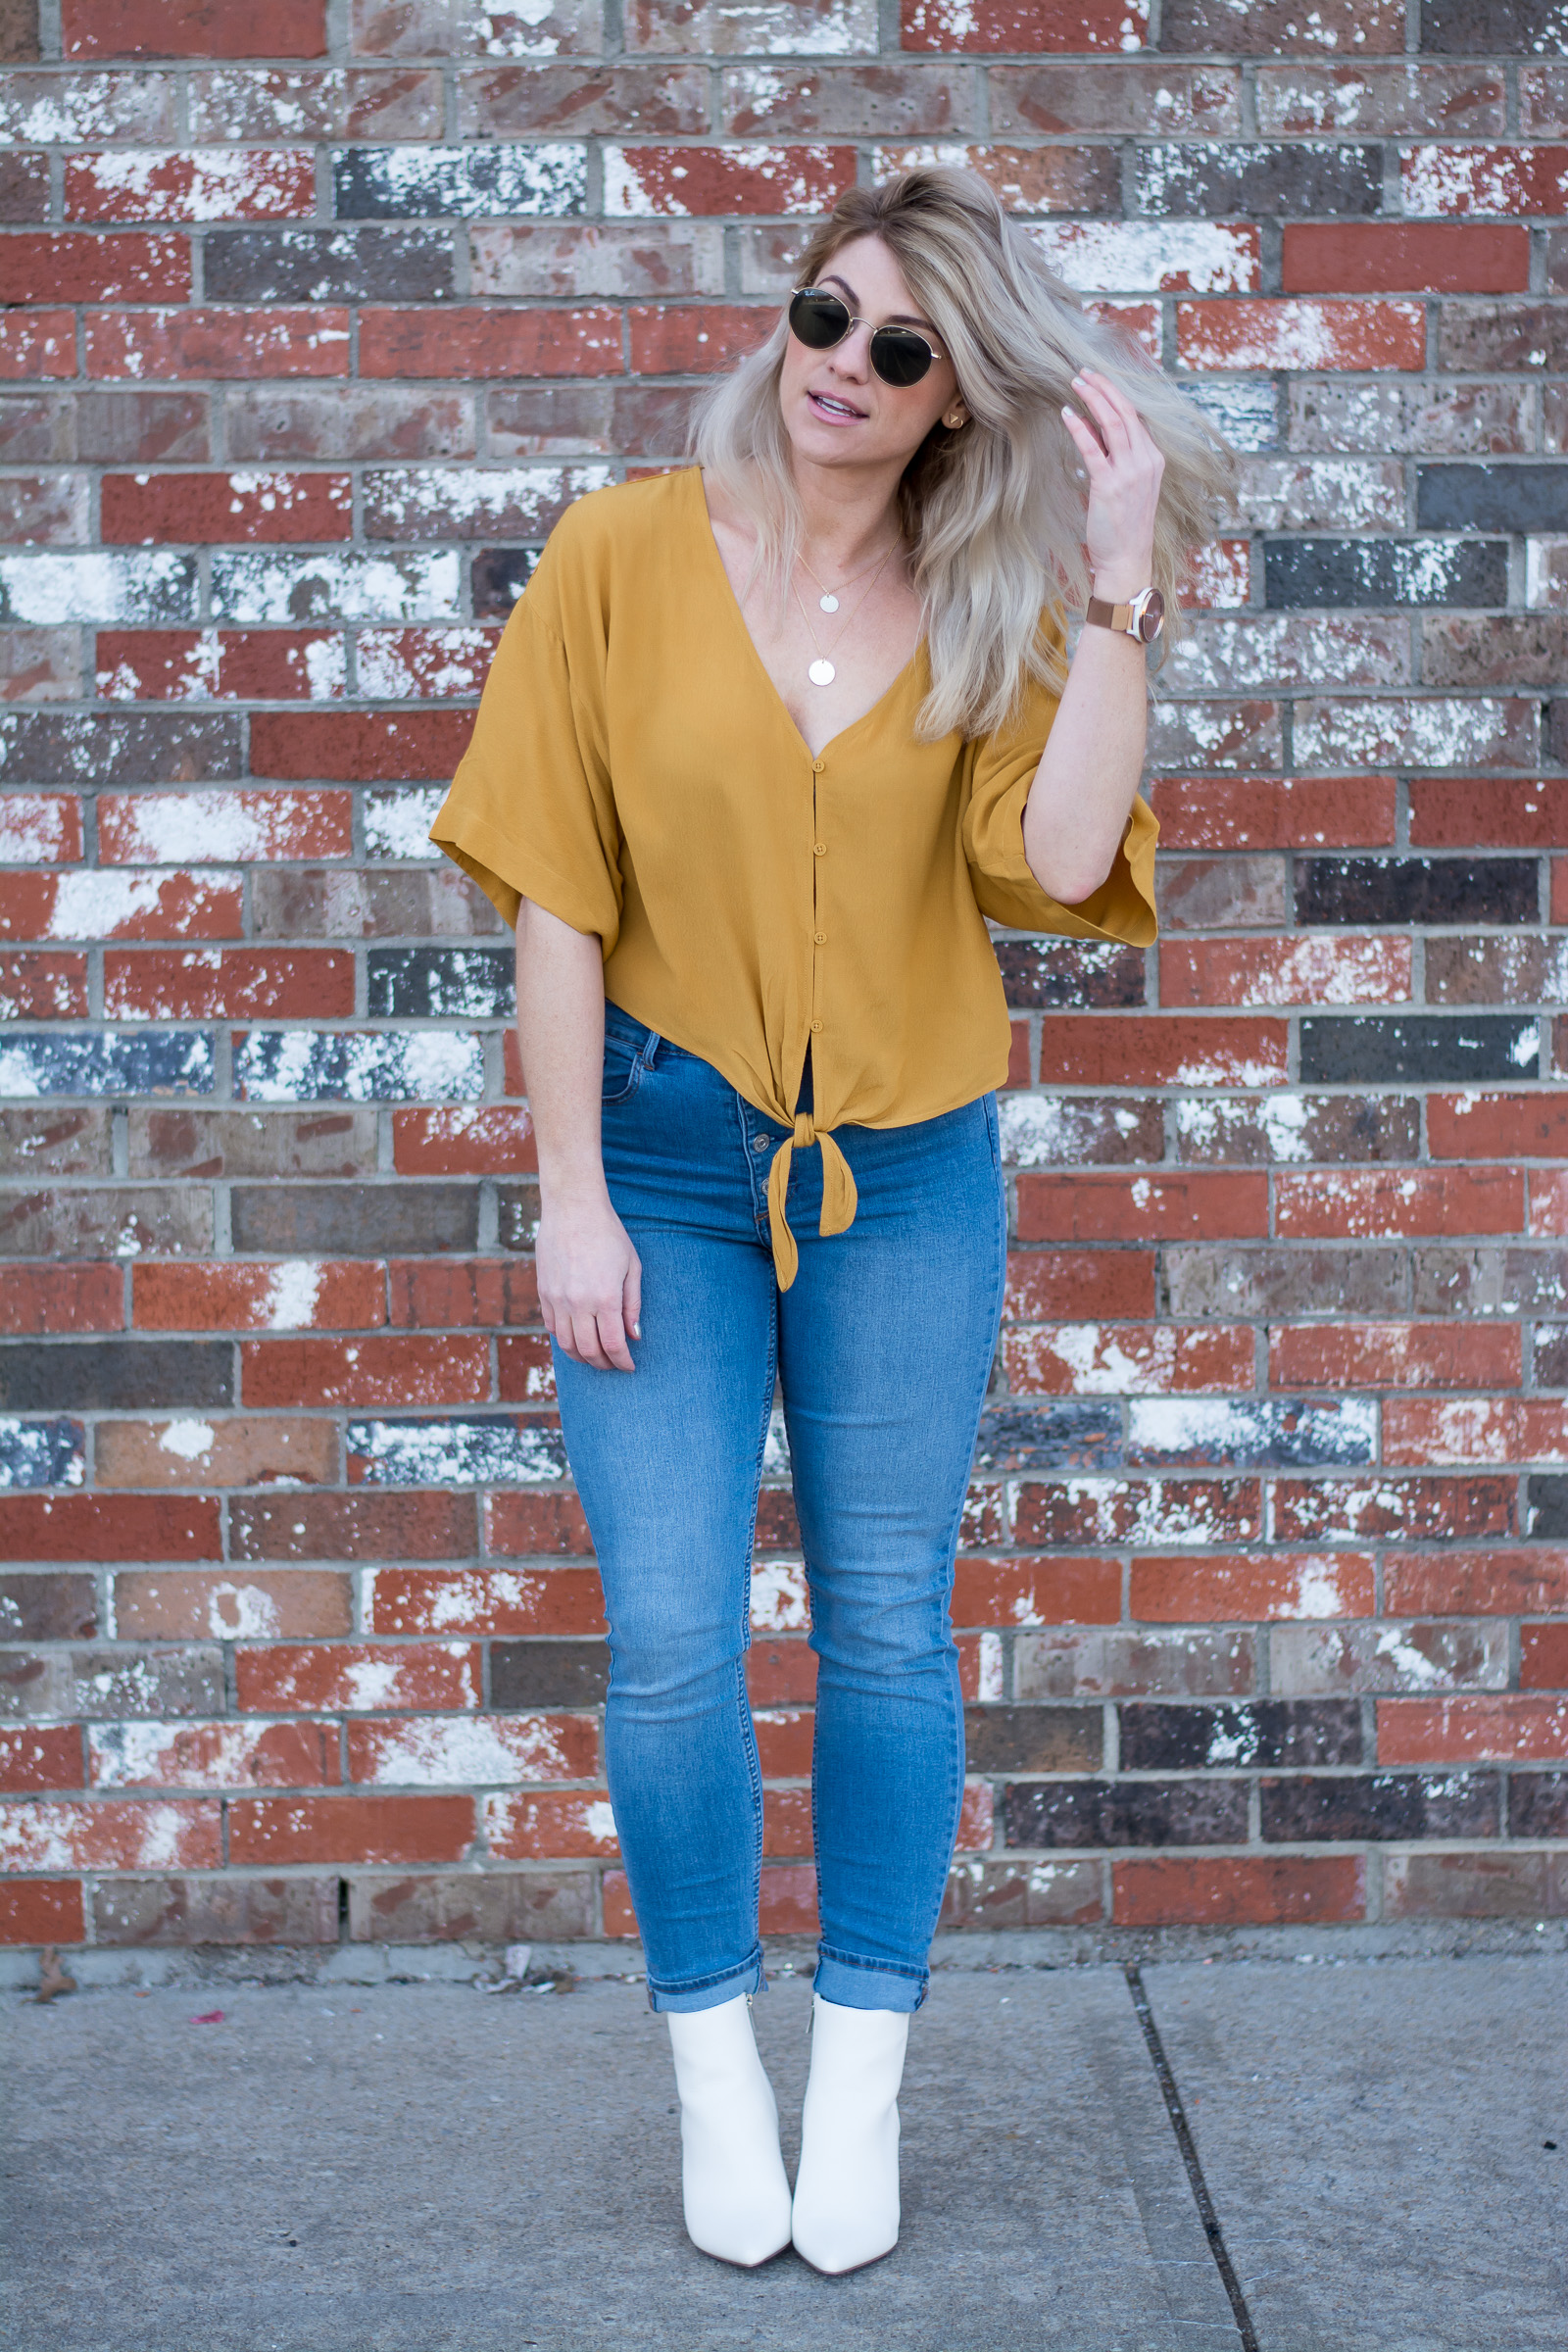 Spring Outfit Idea: Mustard Blouse + White Booties. | Ashley from LSR